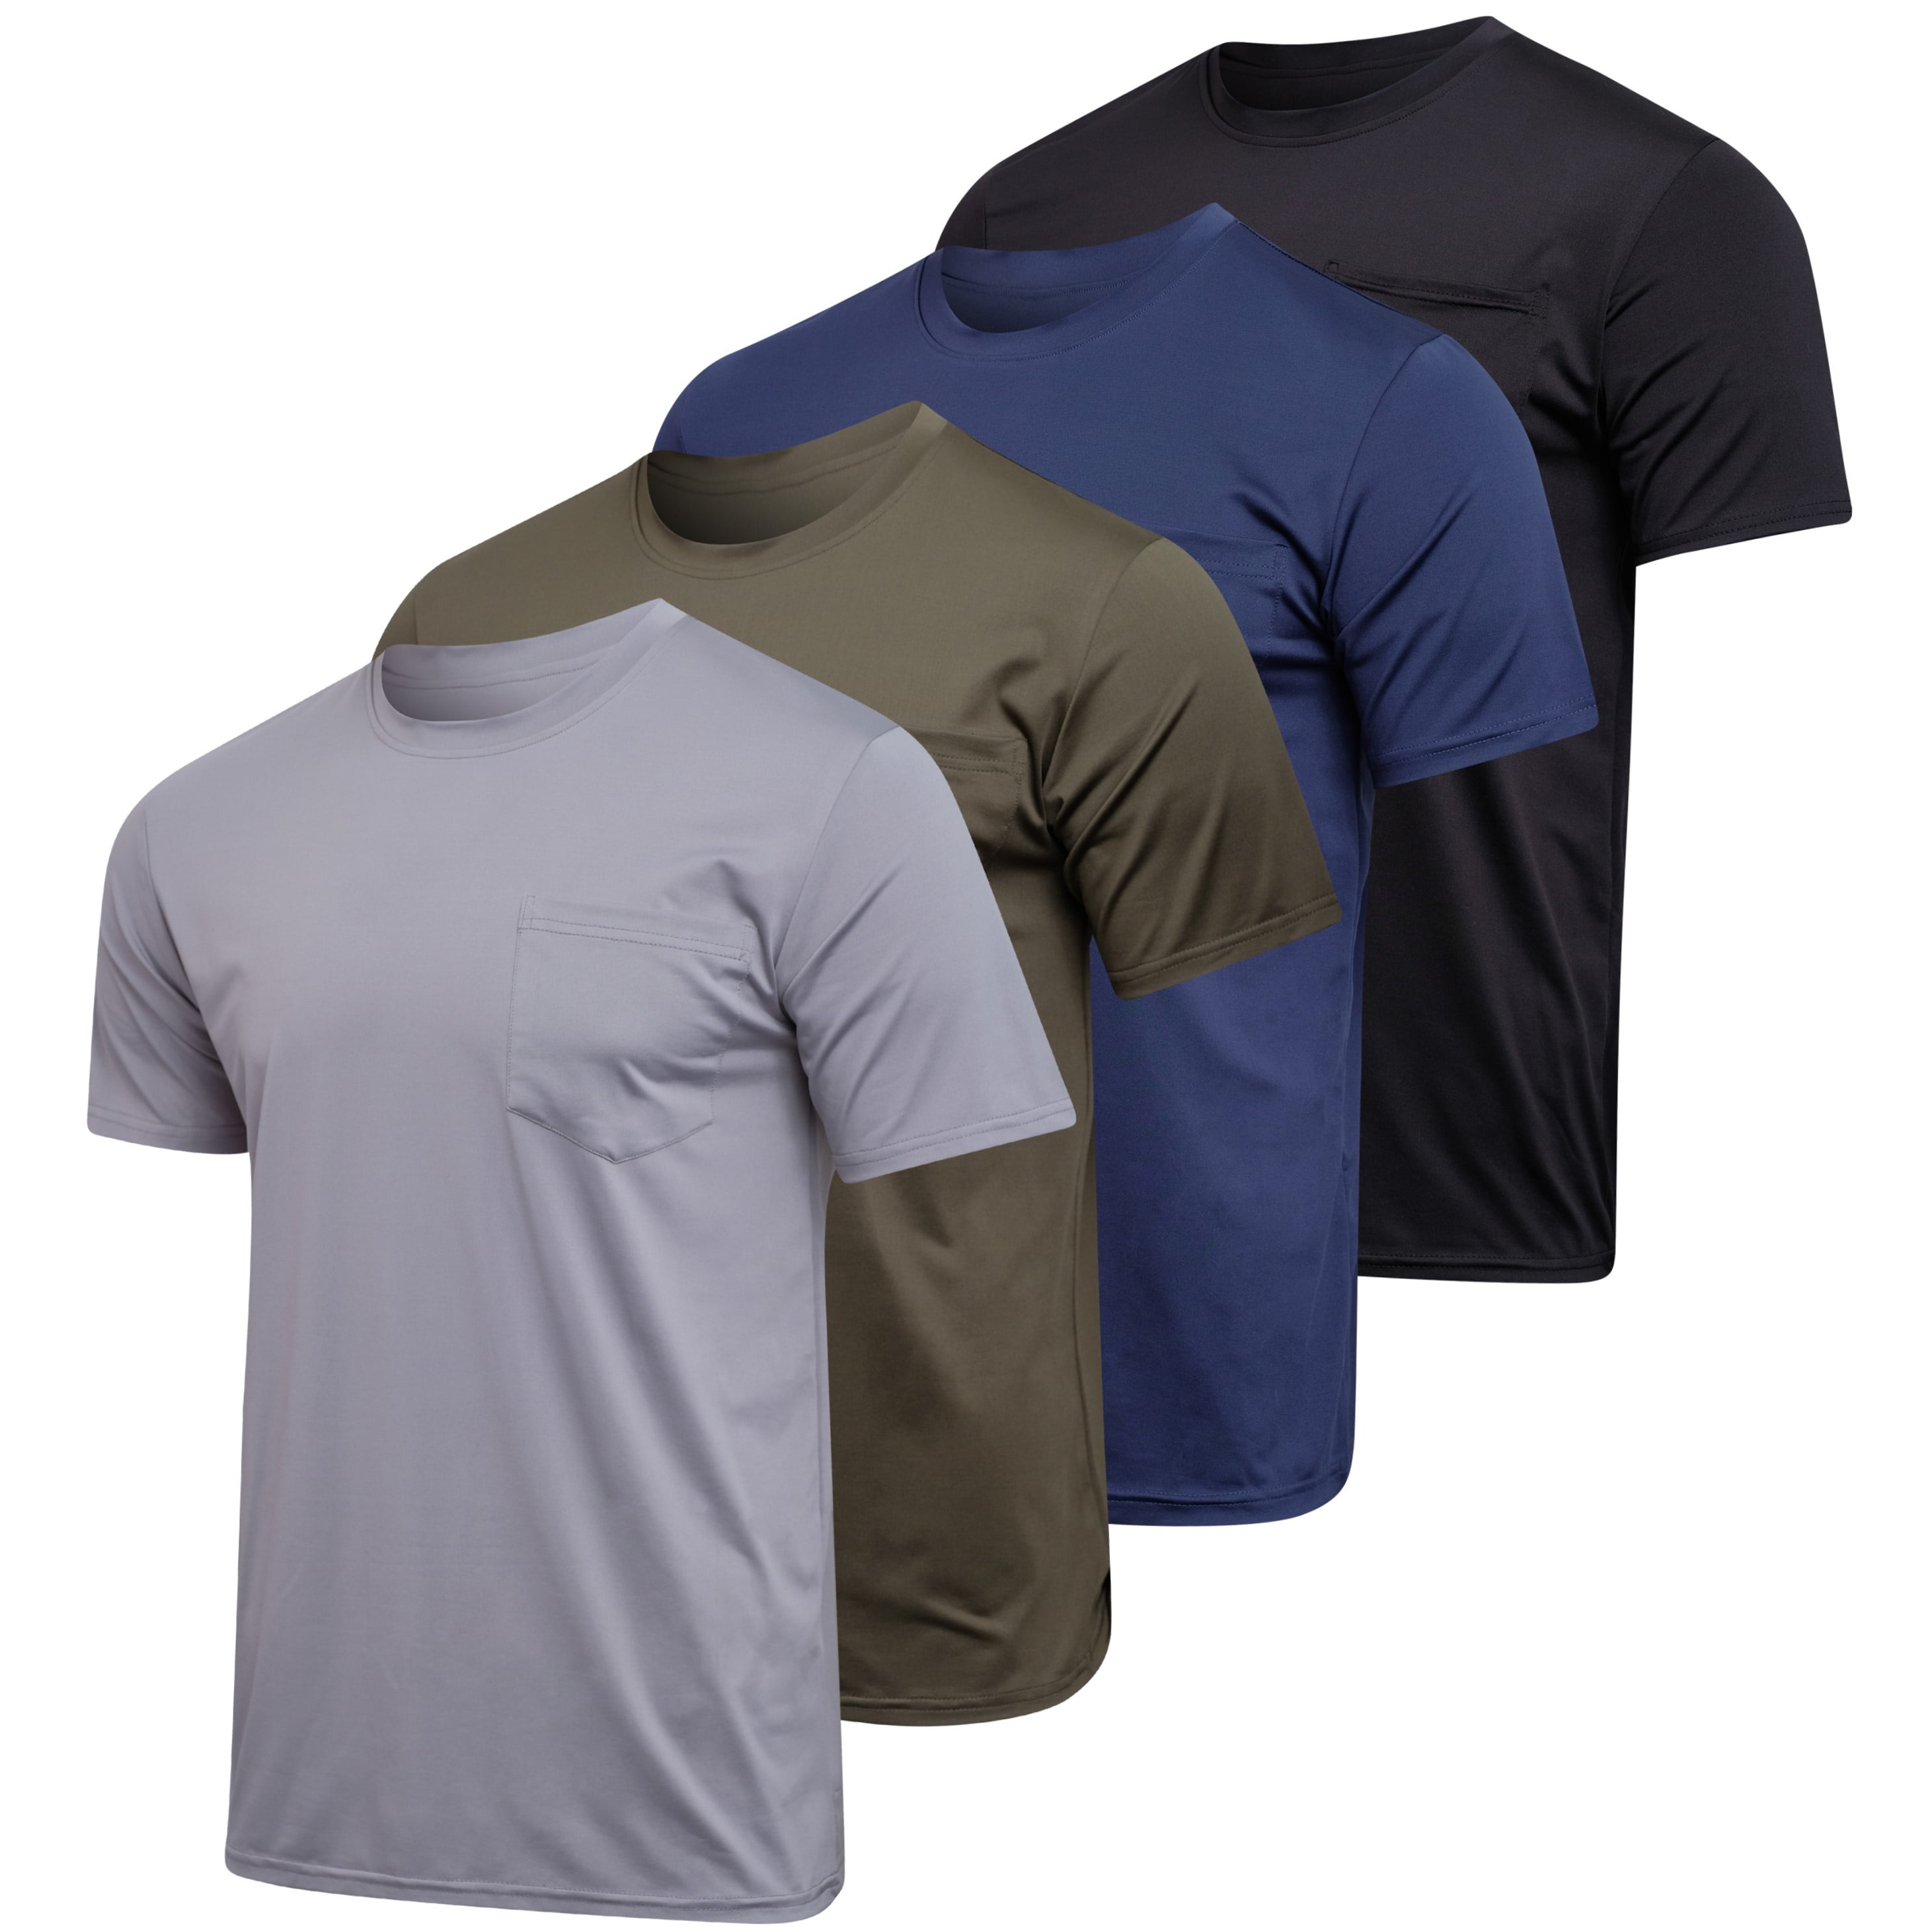 Real Essentials 4 Pack: Men's Dry-Fit Short Sleeve Pocket Crew Performance  Athletic T-Shirt (Available in Big & Tall) 